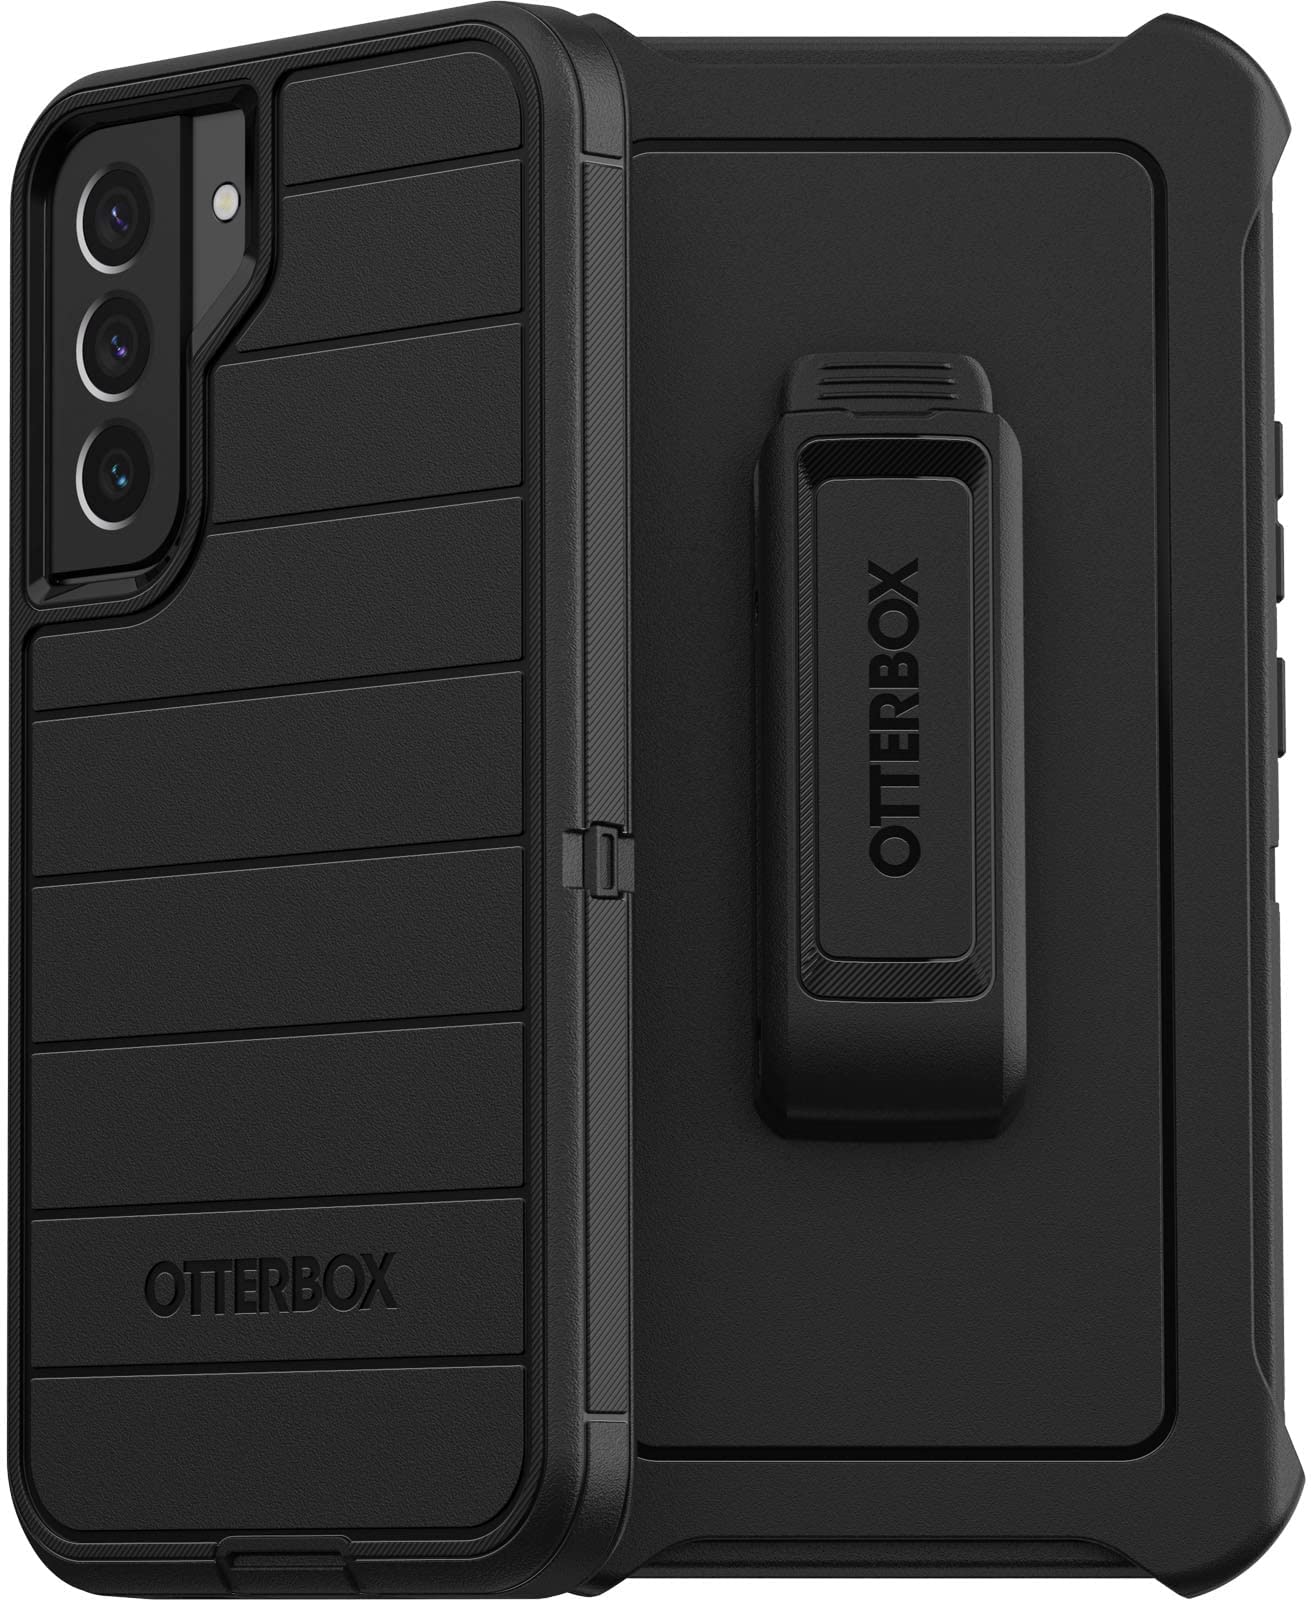 OtterBox Defender Pro Case & Belt Clip/Stand for Samsung Galaxy S22 Plus (NOT S22 or S22 Ultra Models) (Black)